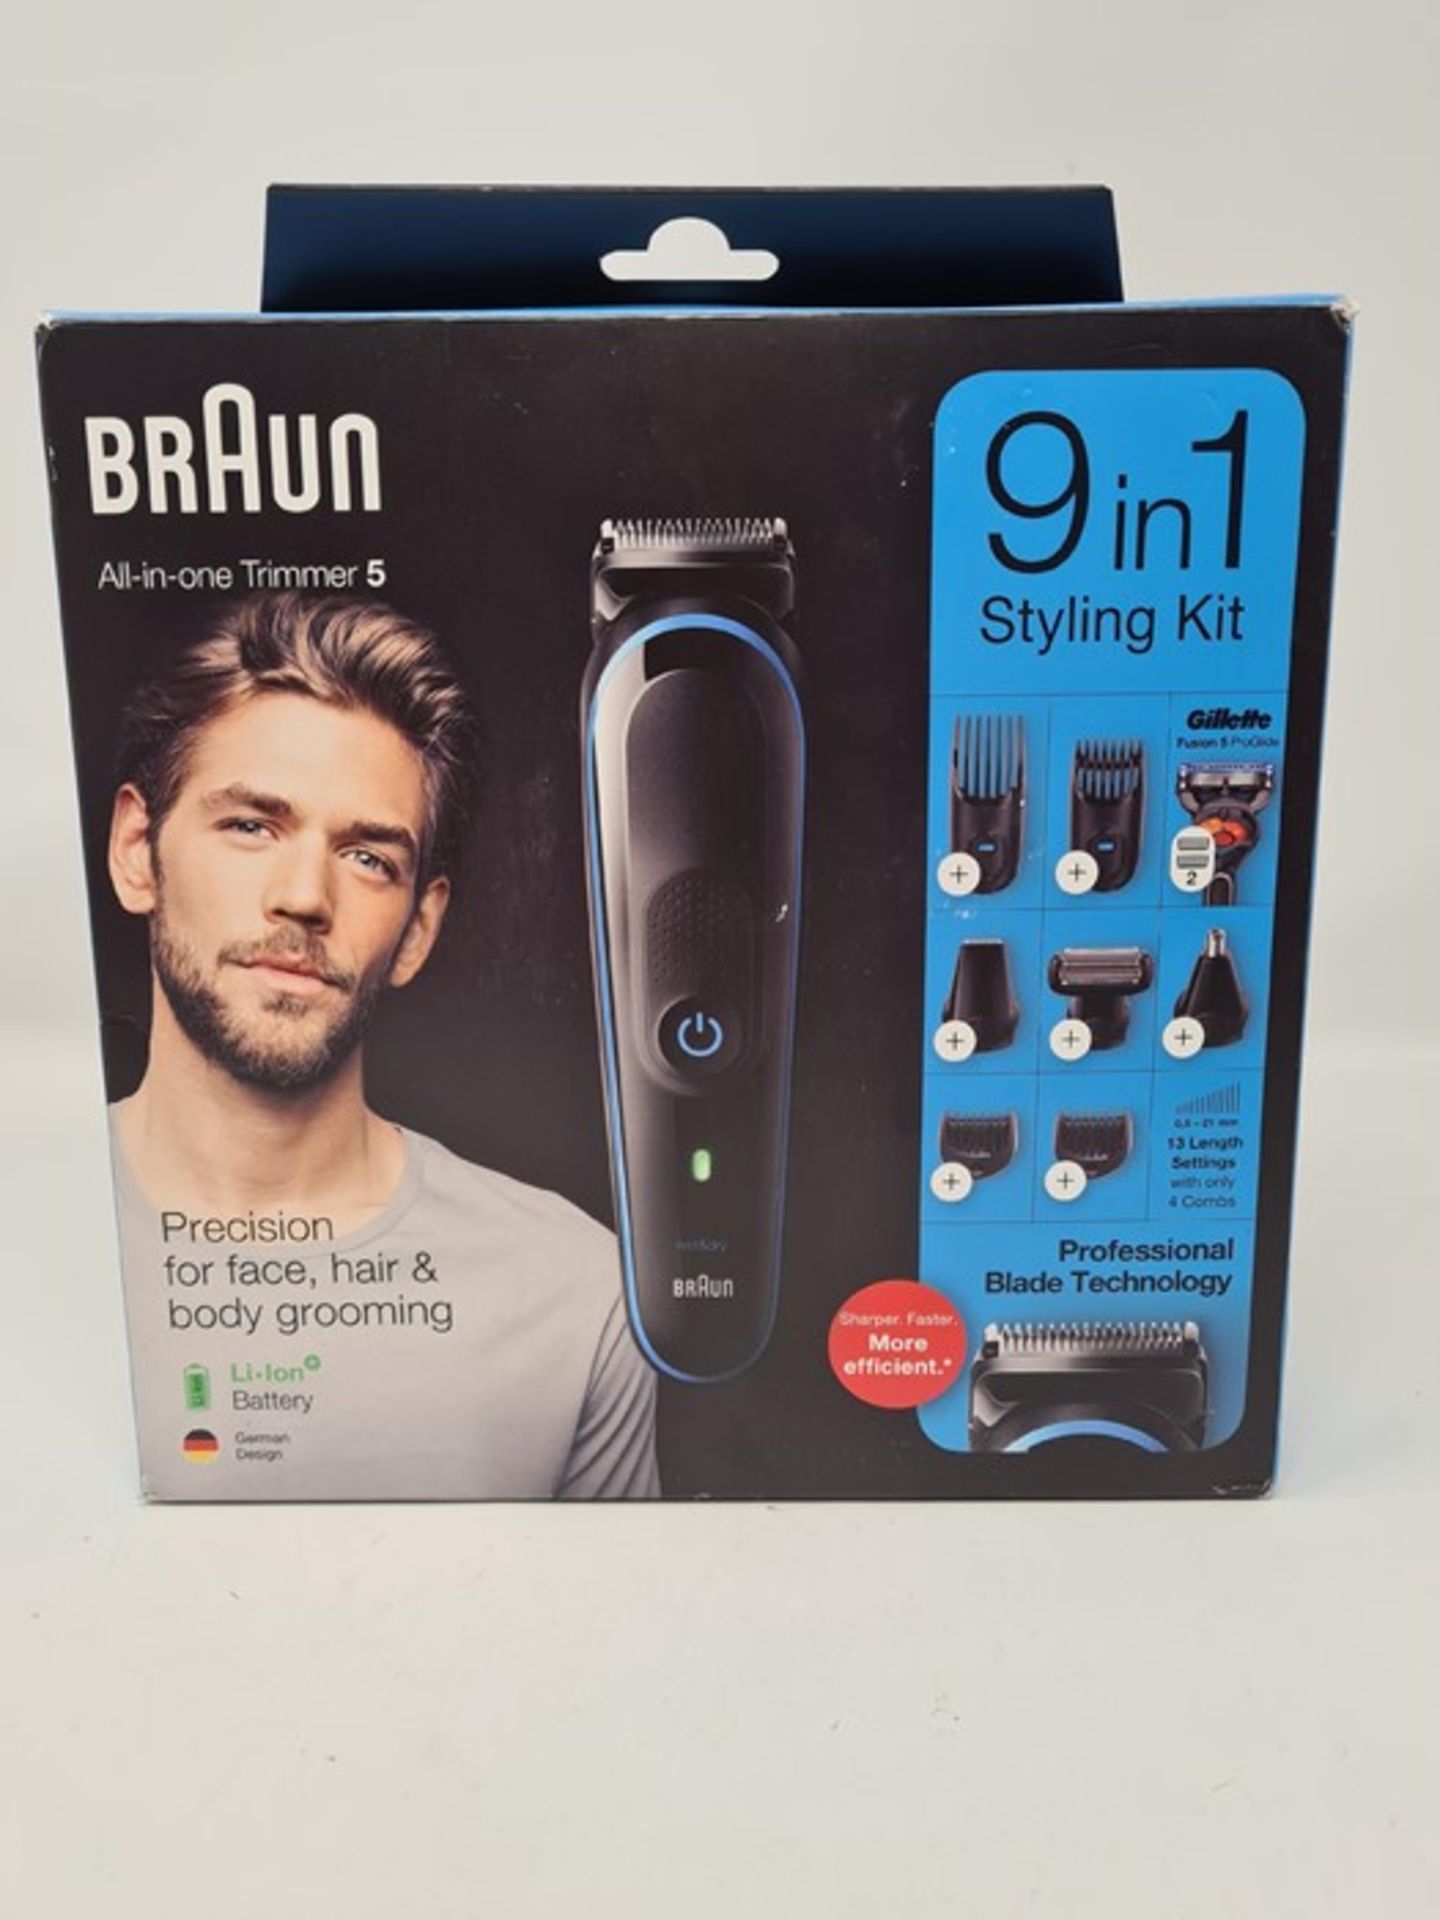 Braun 9-in-1 All-in-one Trimmer 5 MGK5280, Beard - Image 2 of 2